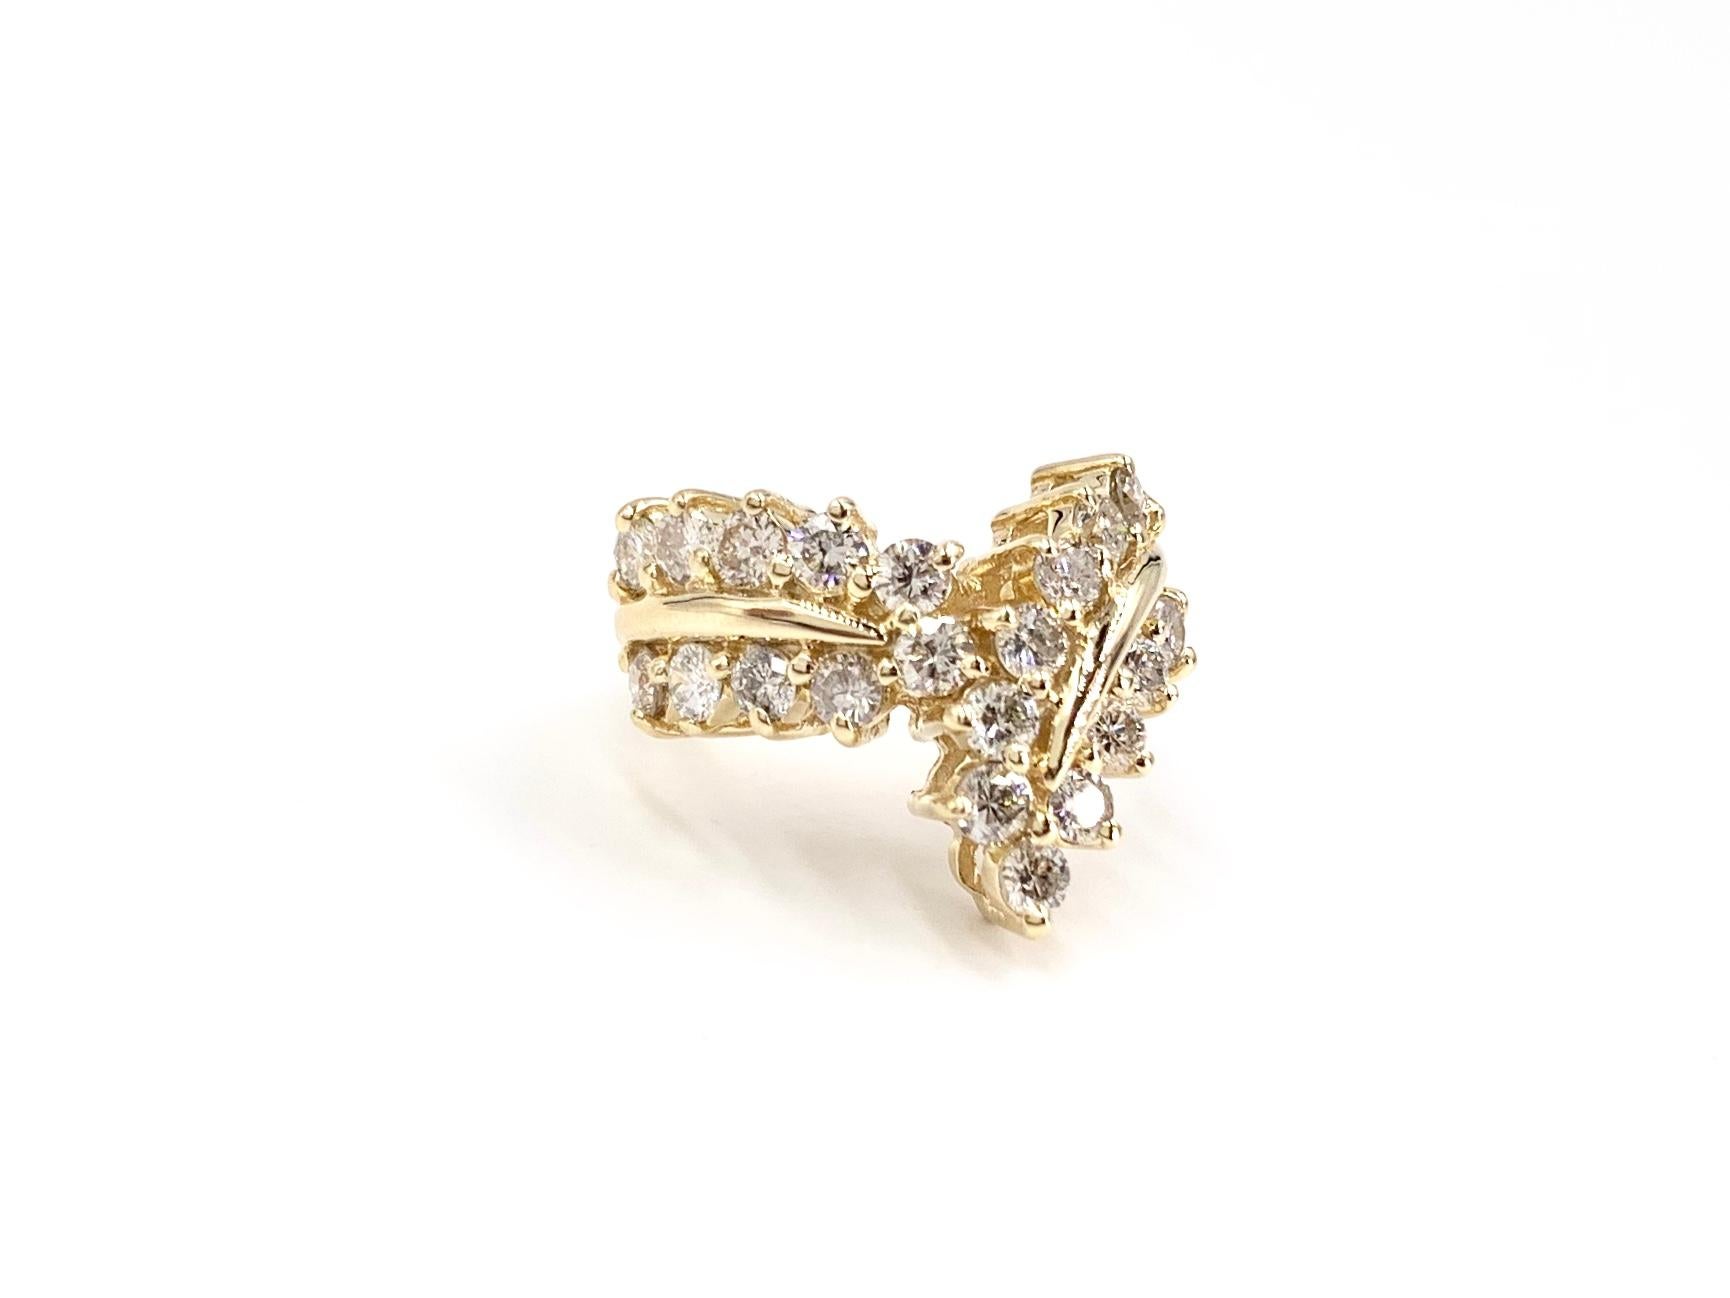 Fashionable and comfortable polished 14 karat yellow gold statement diamond curved V shape ring featuring 22 prong set round brilliant diamonds at approximately 1.25 carats total weight.
Diamond quality is approximately G color, SI1 clarity.
Finger